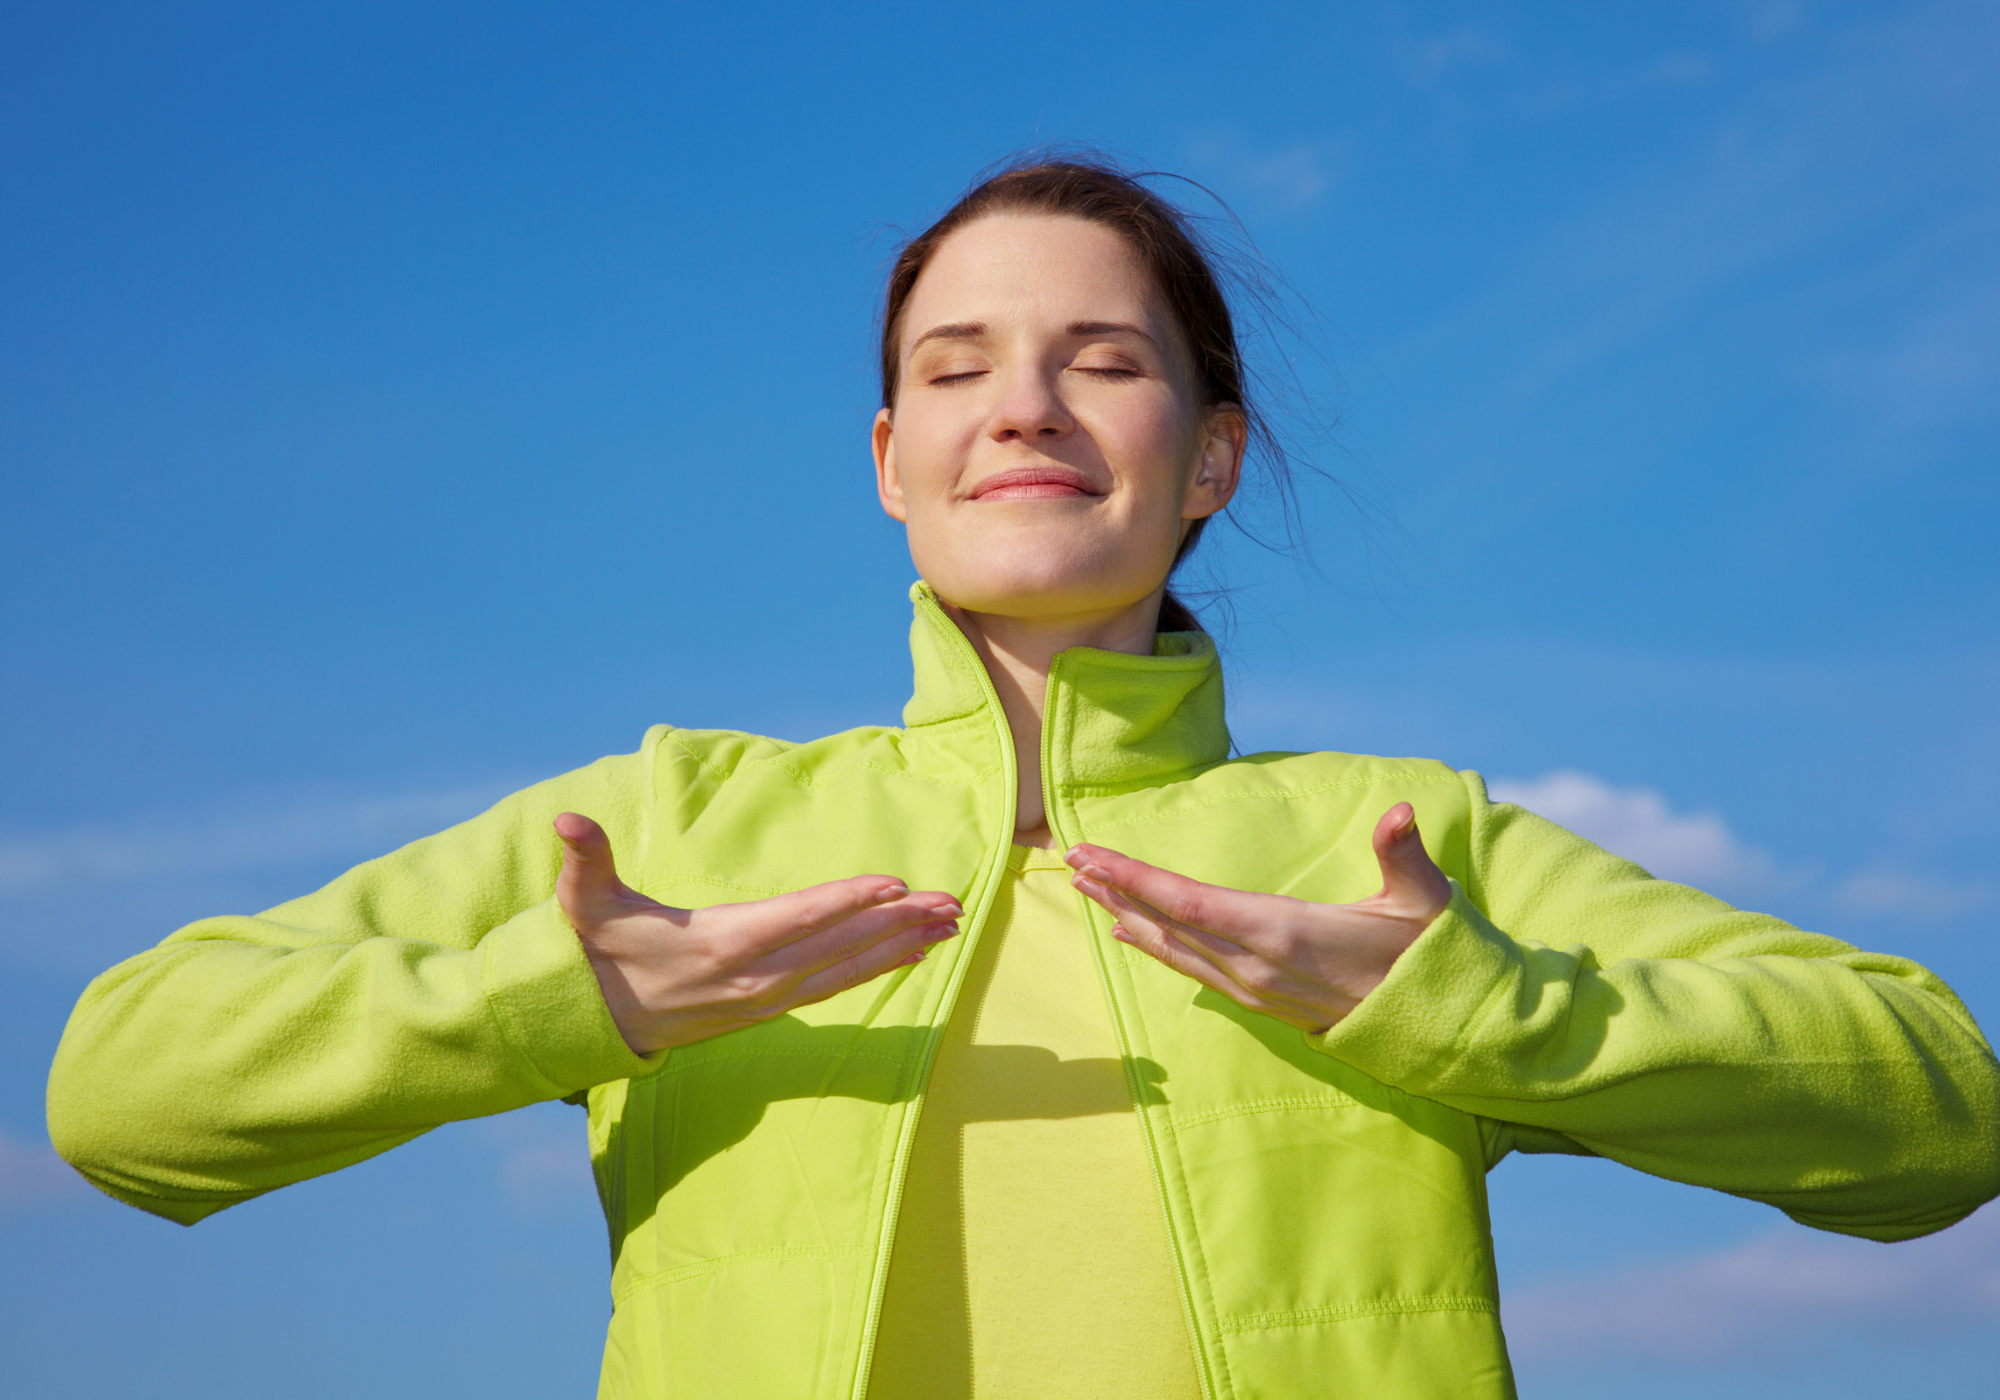 Benefits of Breathing Through the Nose While Exercising